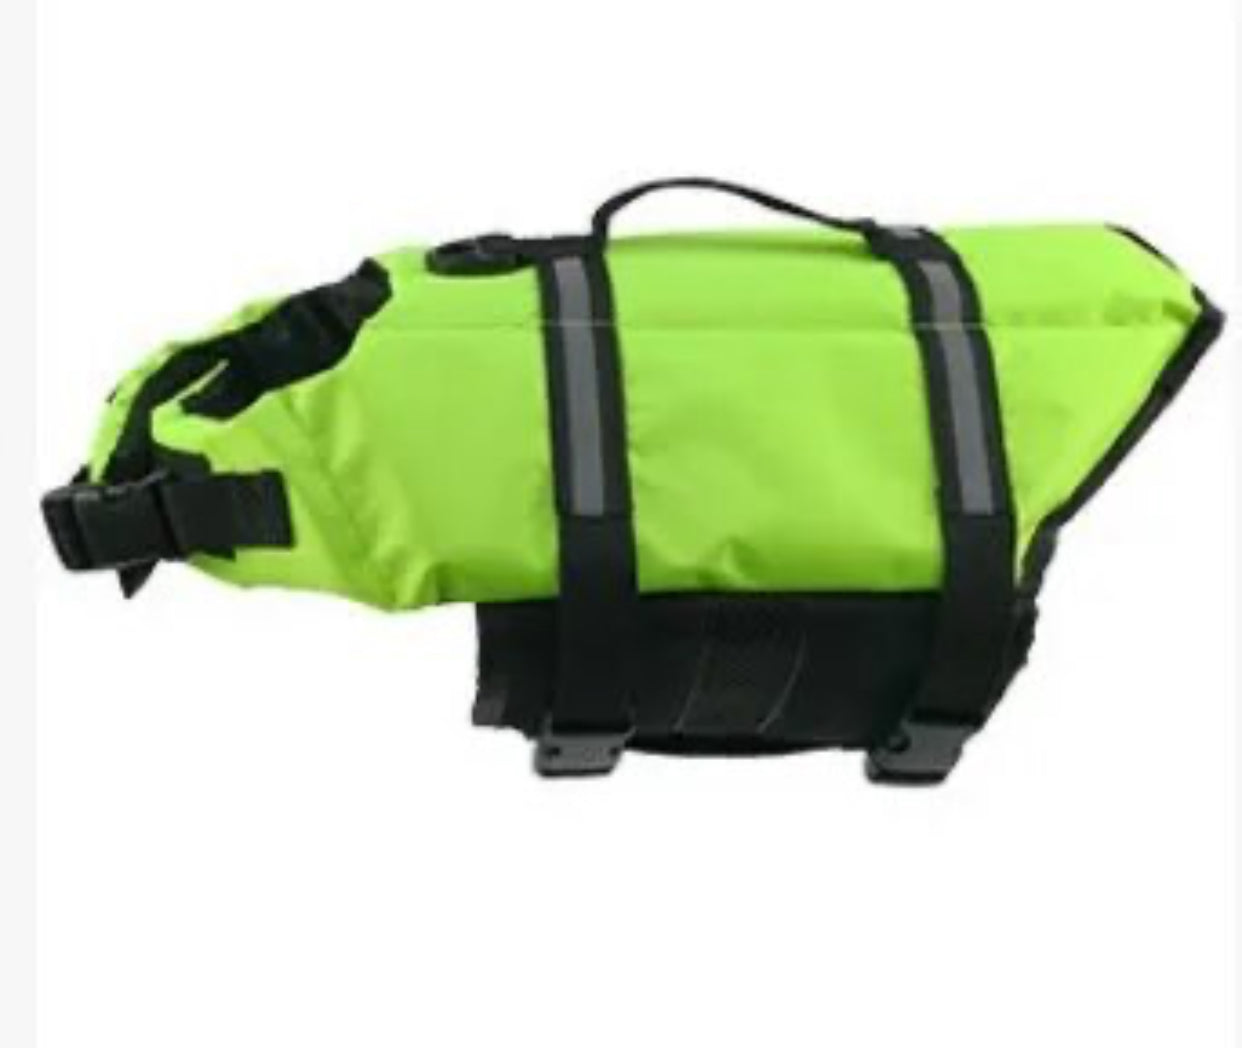 Life jacket for dogs. Breathable and safe. Easy to identify fluorescent color.